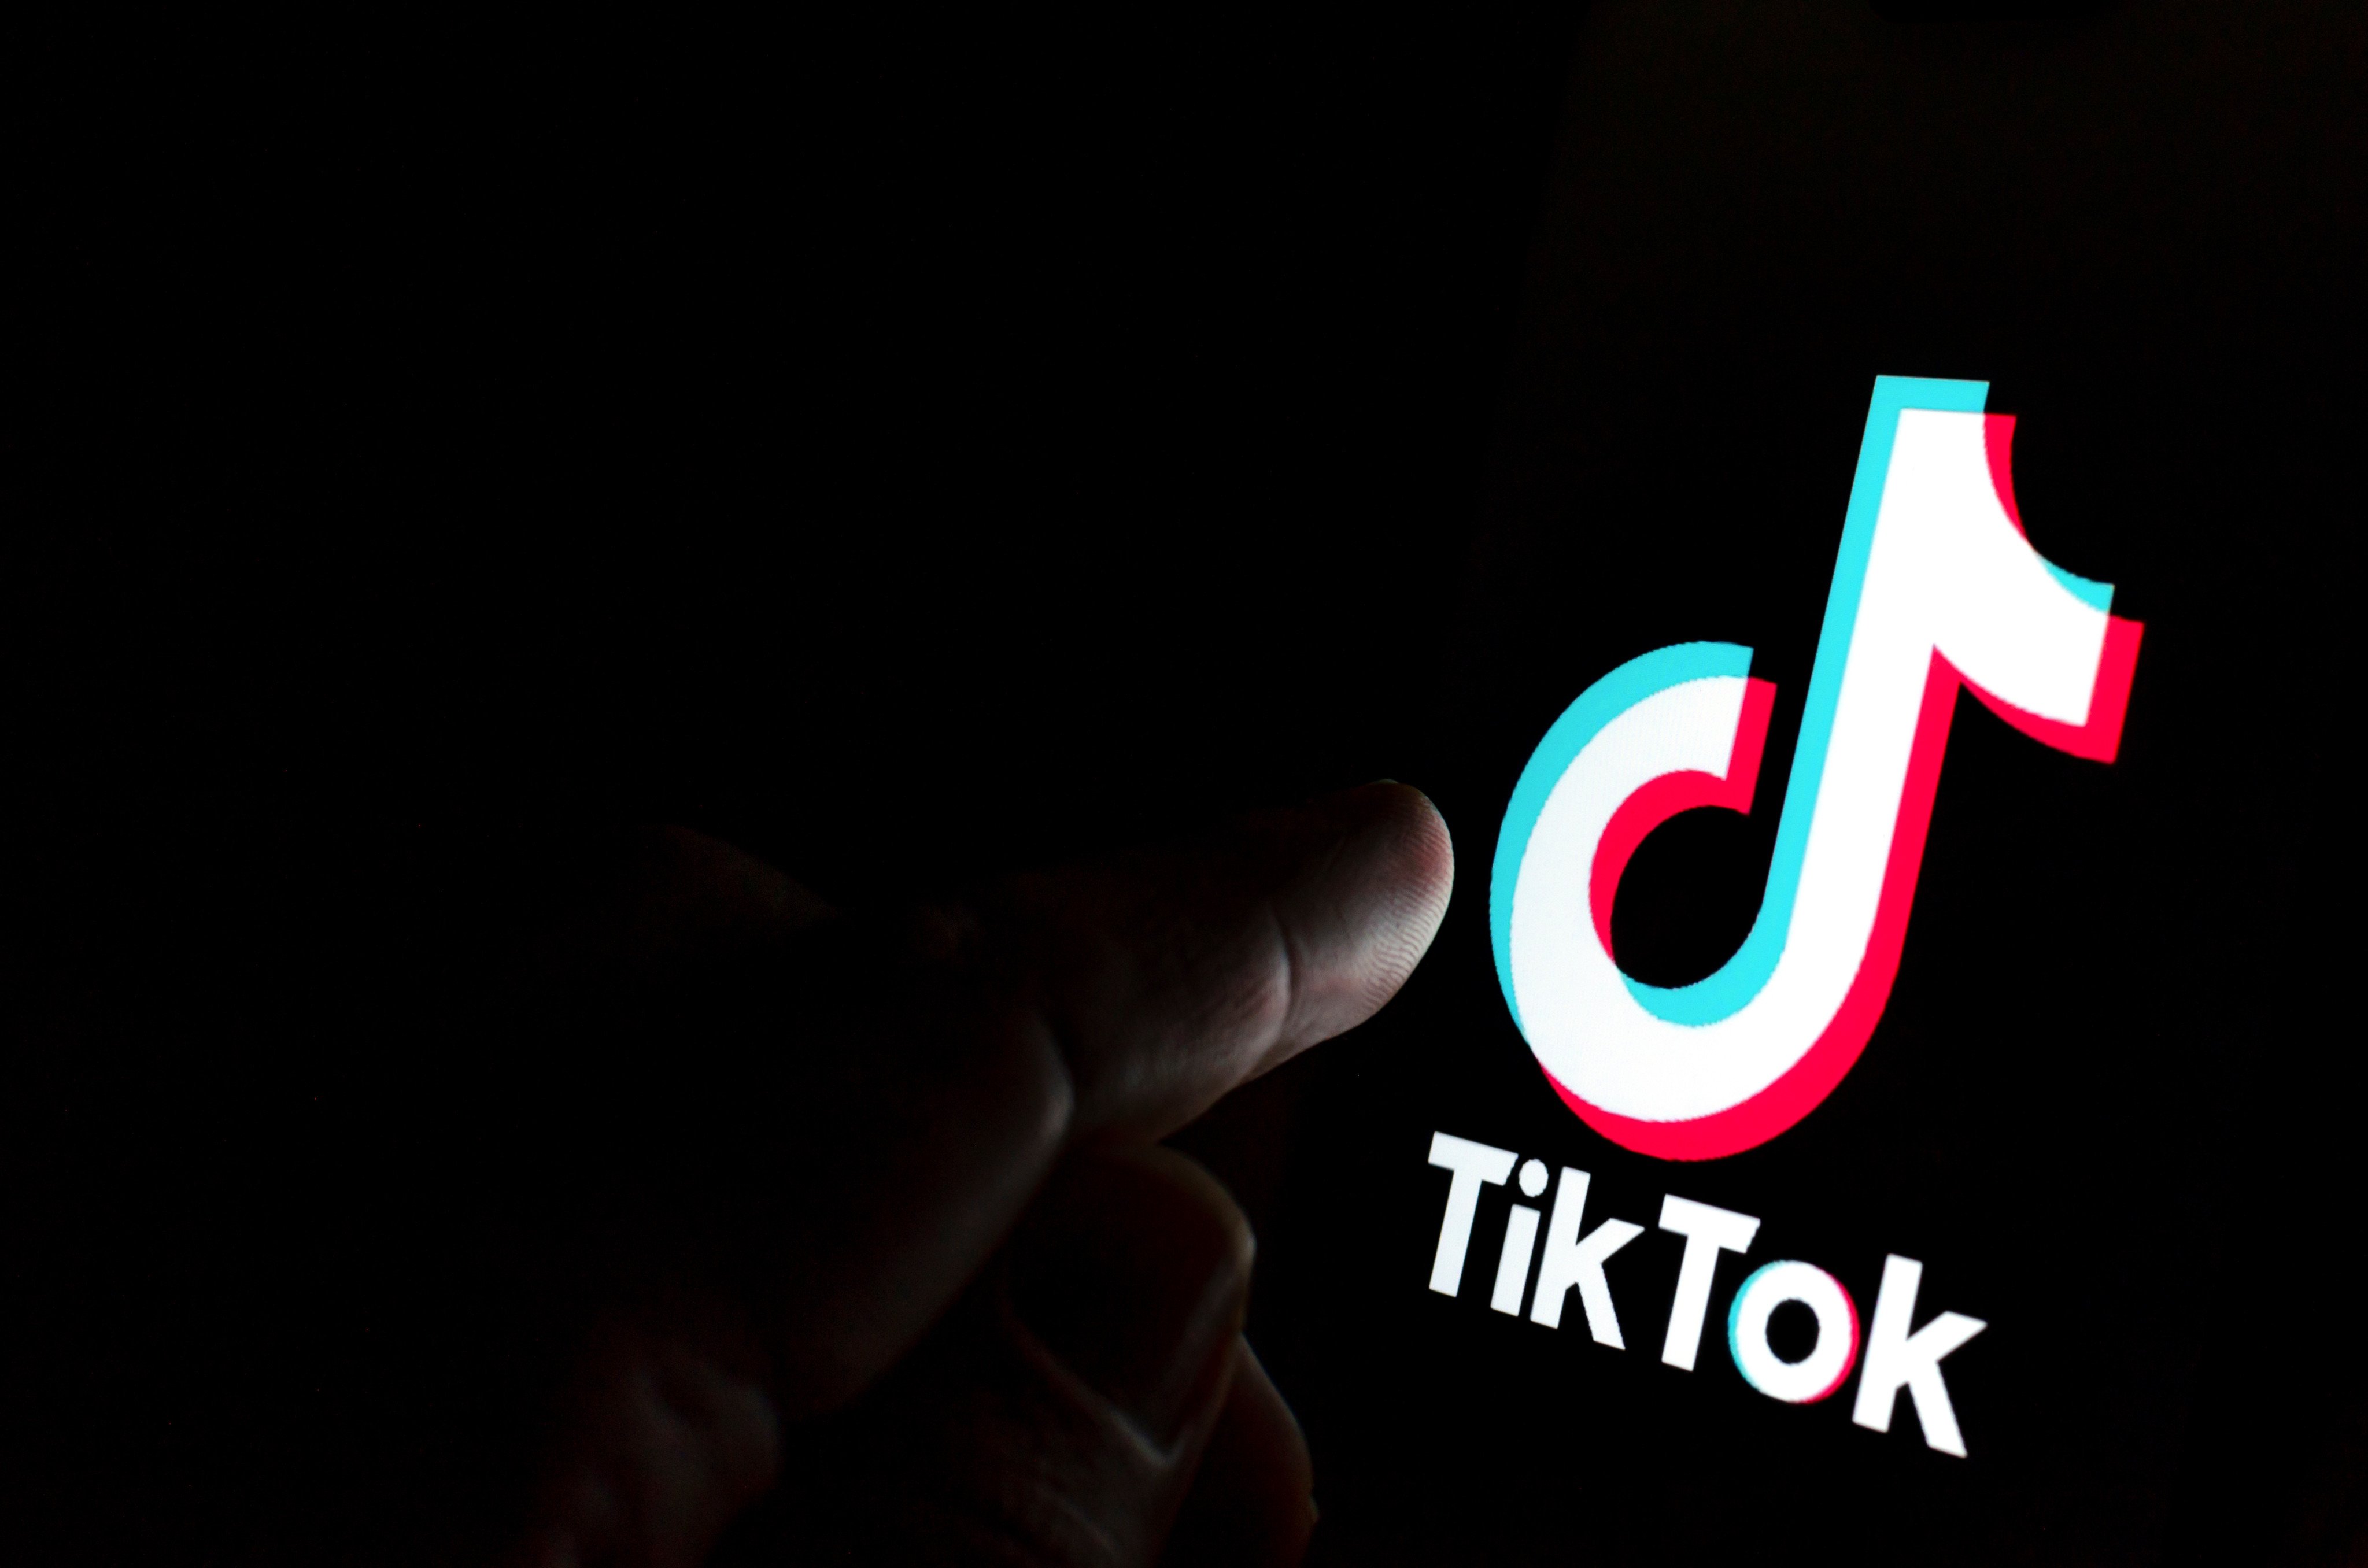 TikTok app logo on screen and a finger pointing at it.  Concept for app being in spotlight- blame, antitrust, regulation, child privacy, lawsuit, security. Stafford, United Kingdom - July 28 2019 Photo: Shutterstock Images